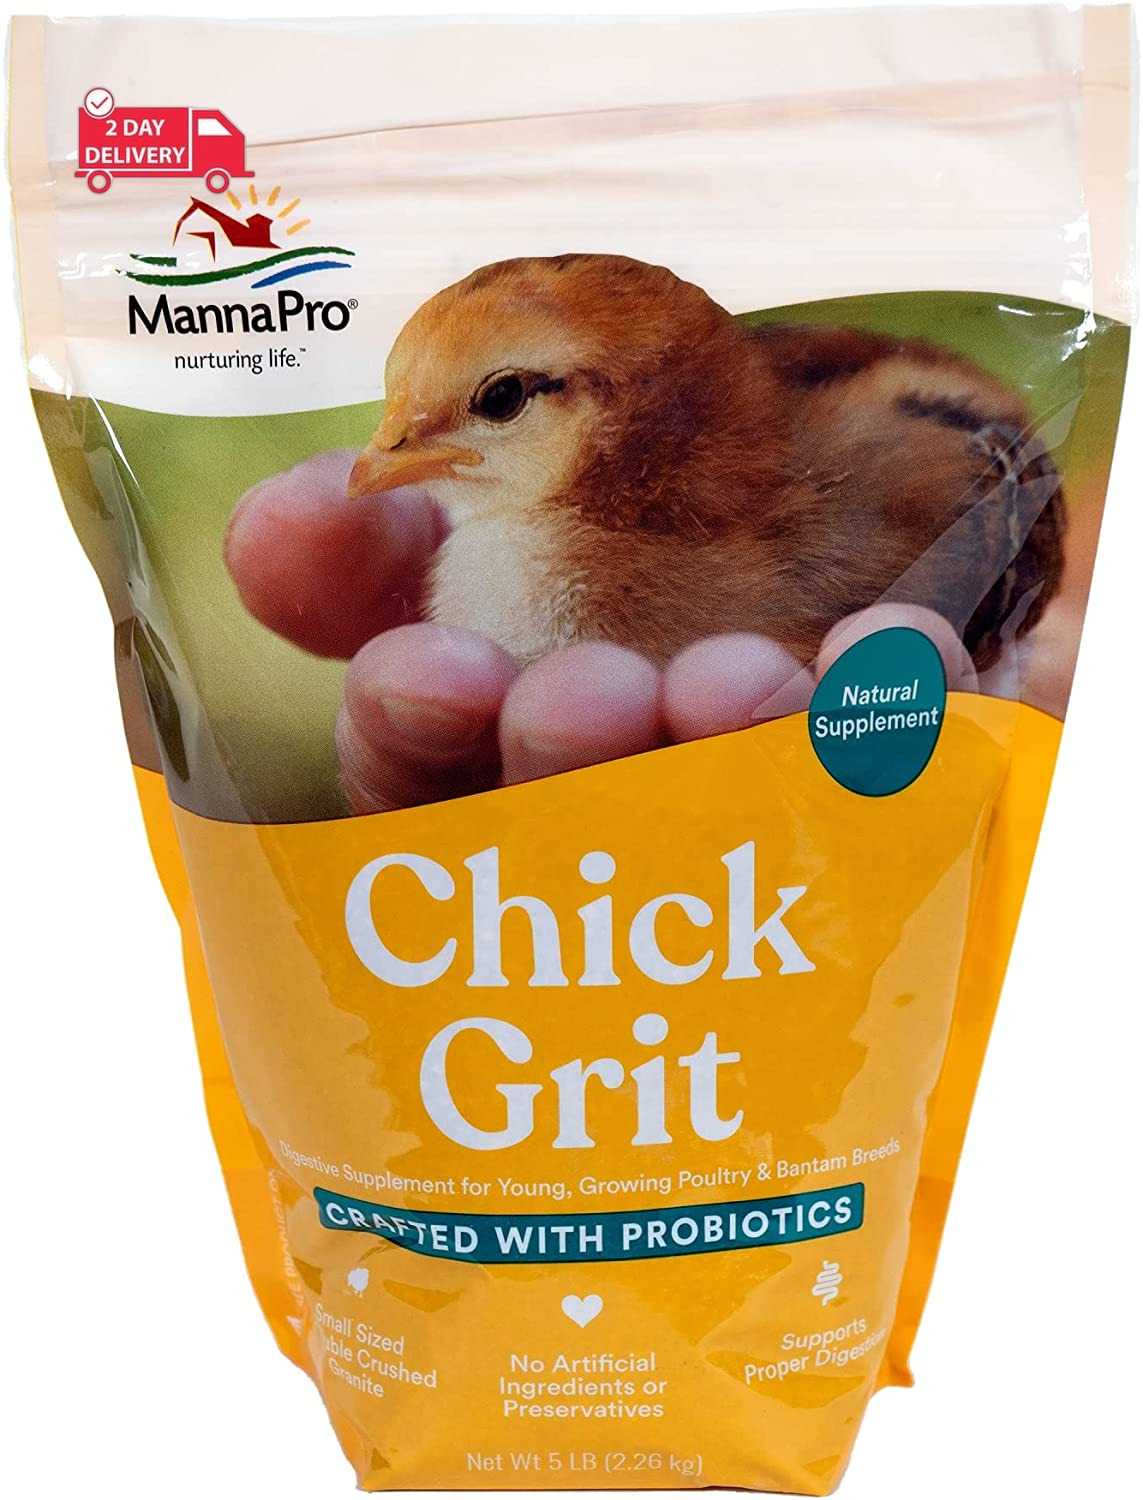 Chick Grit Digestive Supplement for Young Growing Poultry & Bantam Breeds - No A